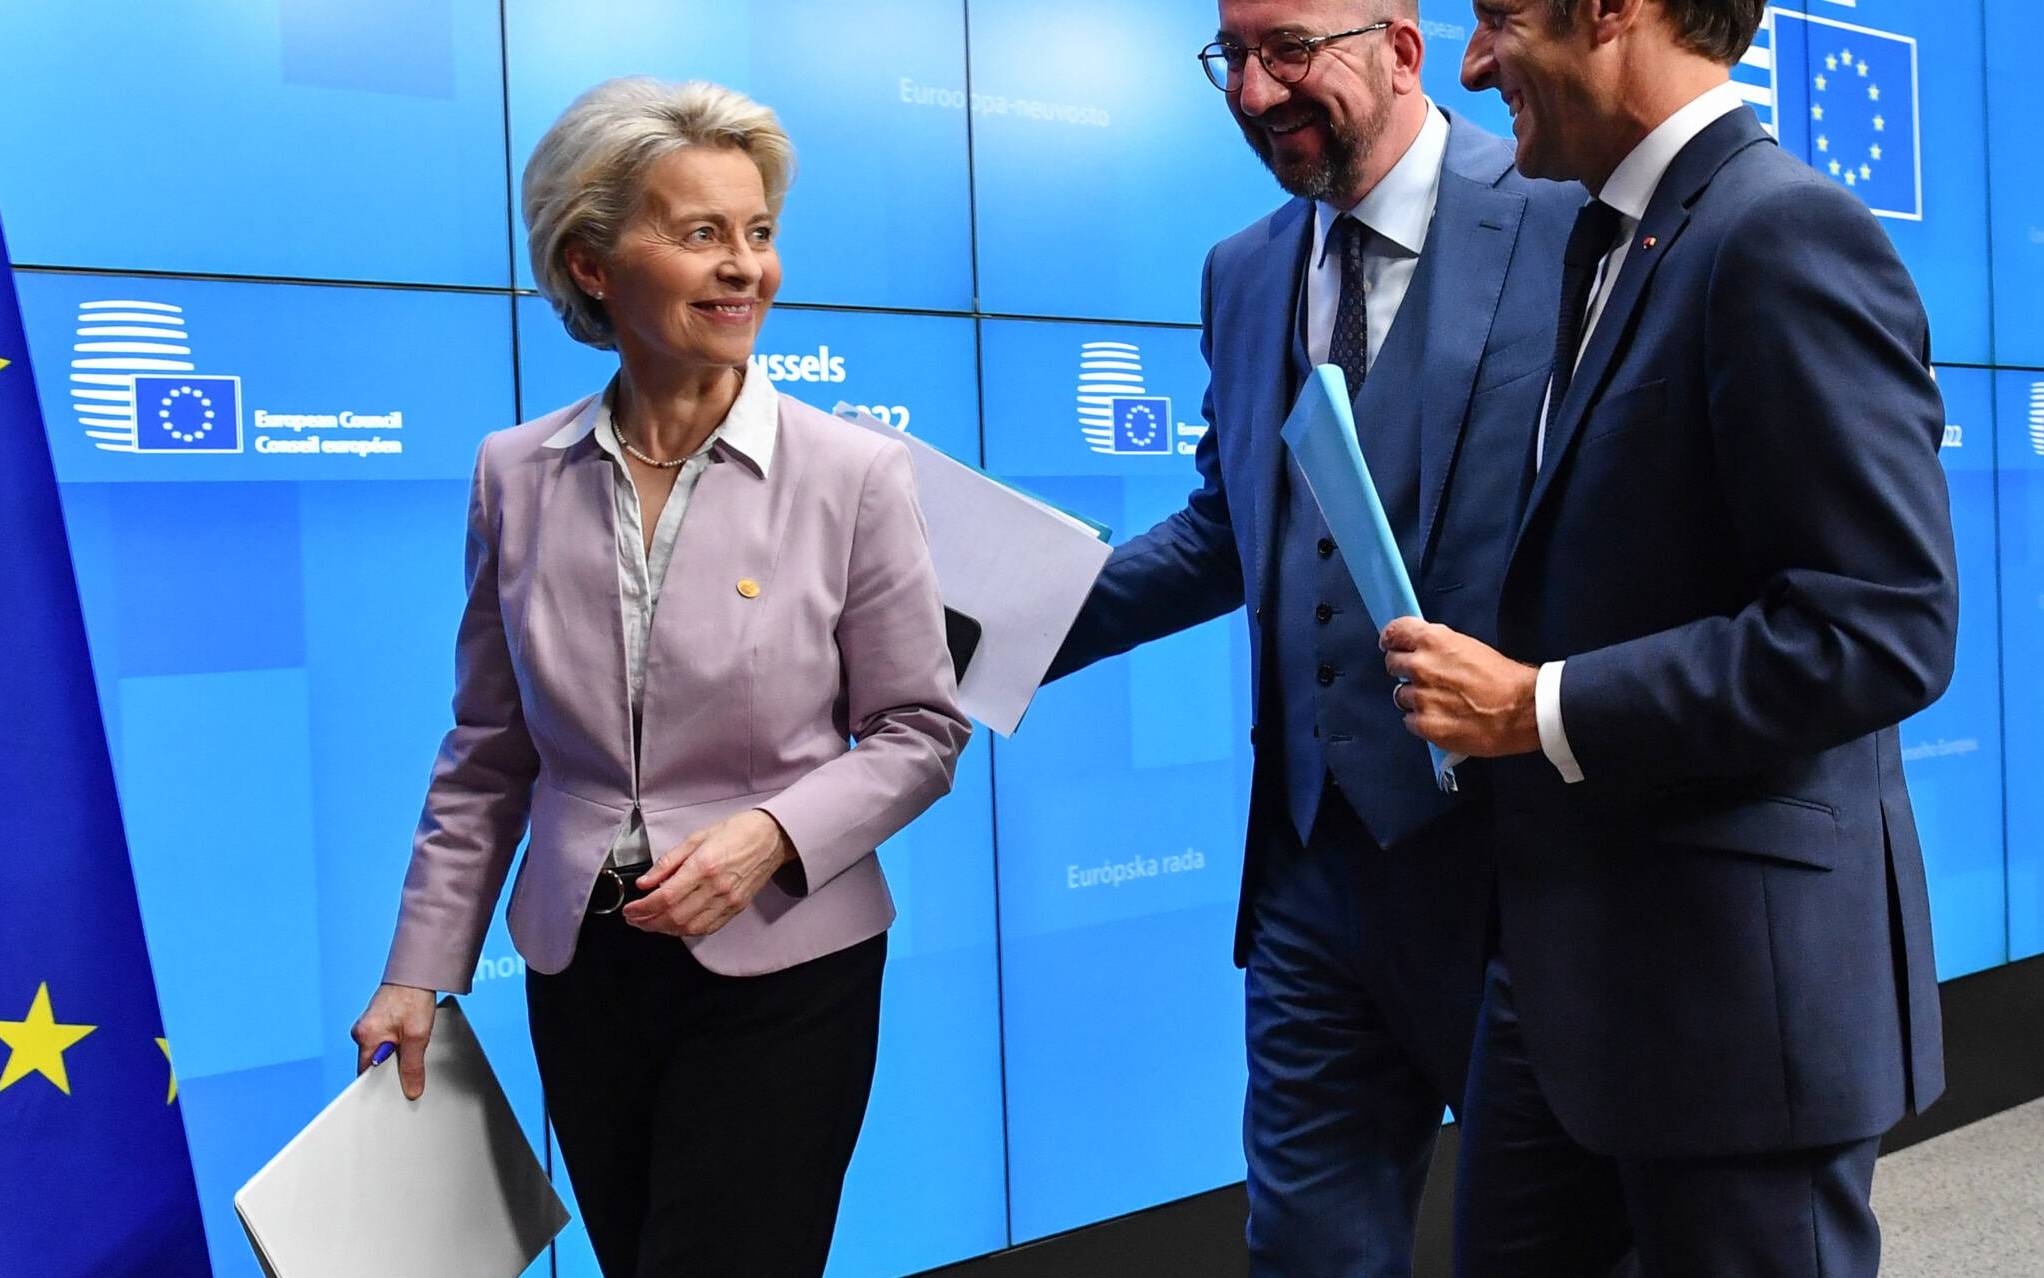 President of the European Commission Ursula von der Leyen (L), President of the European Council Charles Michel (C) and France's President Emmanuel Macron (R) leave after holding a press conference during an European Council in Brussels on June 23, 2022. - European Union leaders on June 23, 2022 agreed to grant "candidate status" to Ukraine and Moldova, in a show of support in the face of Russia's war, EU chief Charles Michel said. (Photo by JOHN THYS / AFP)